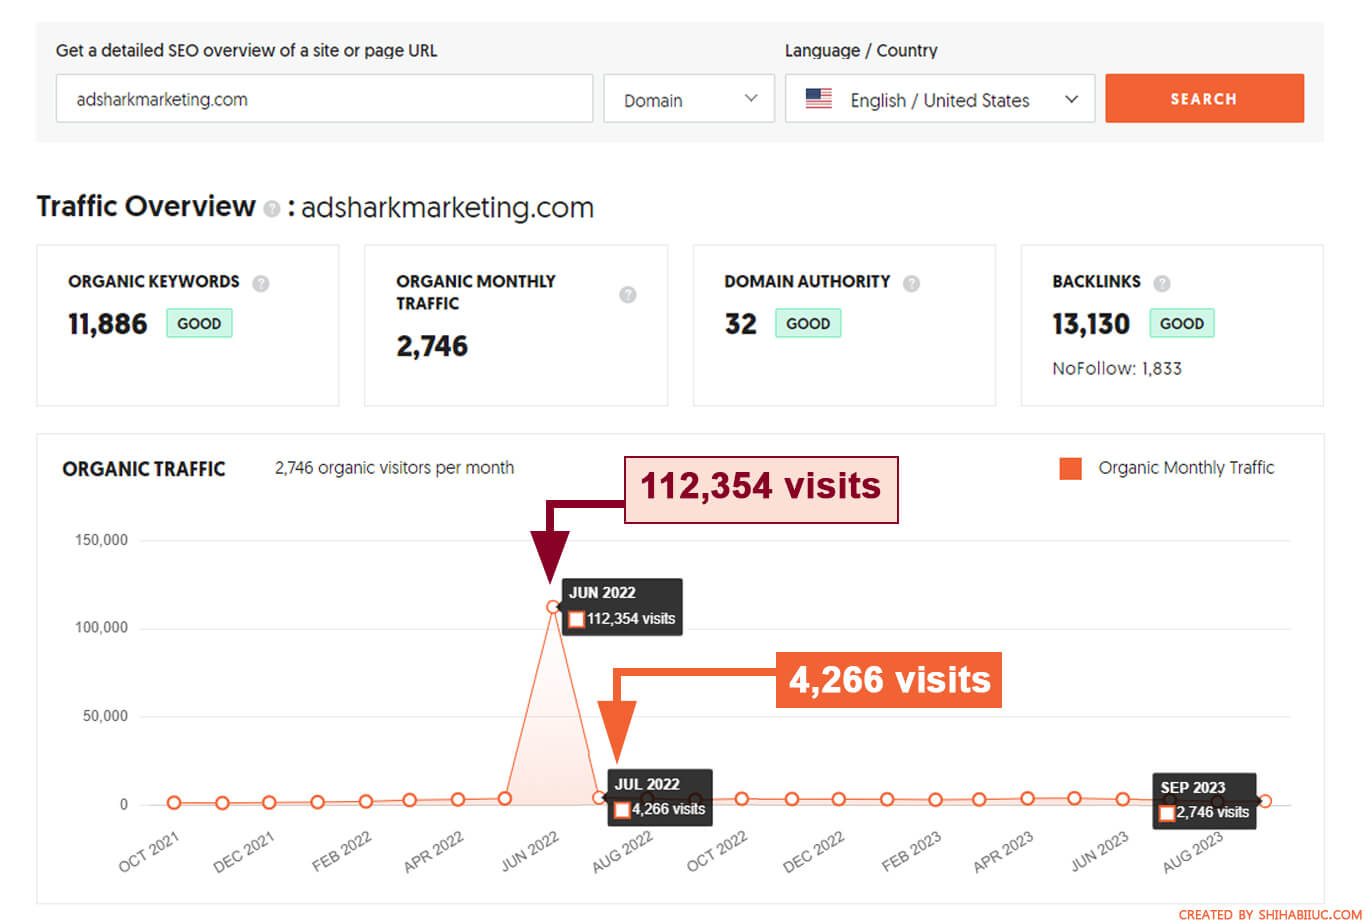 Suspicious backlink profile of a website and its traffic overview